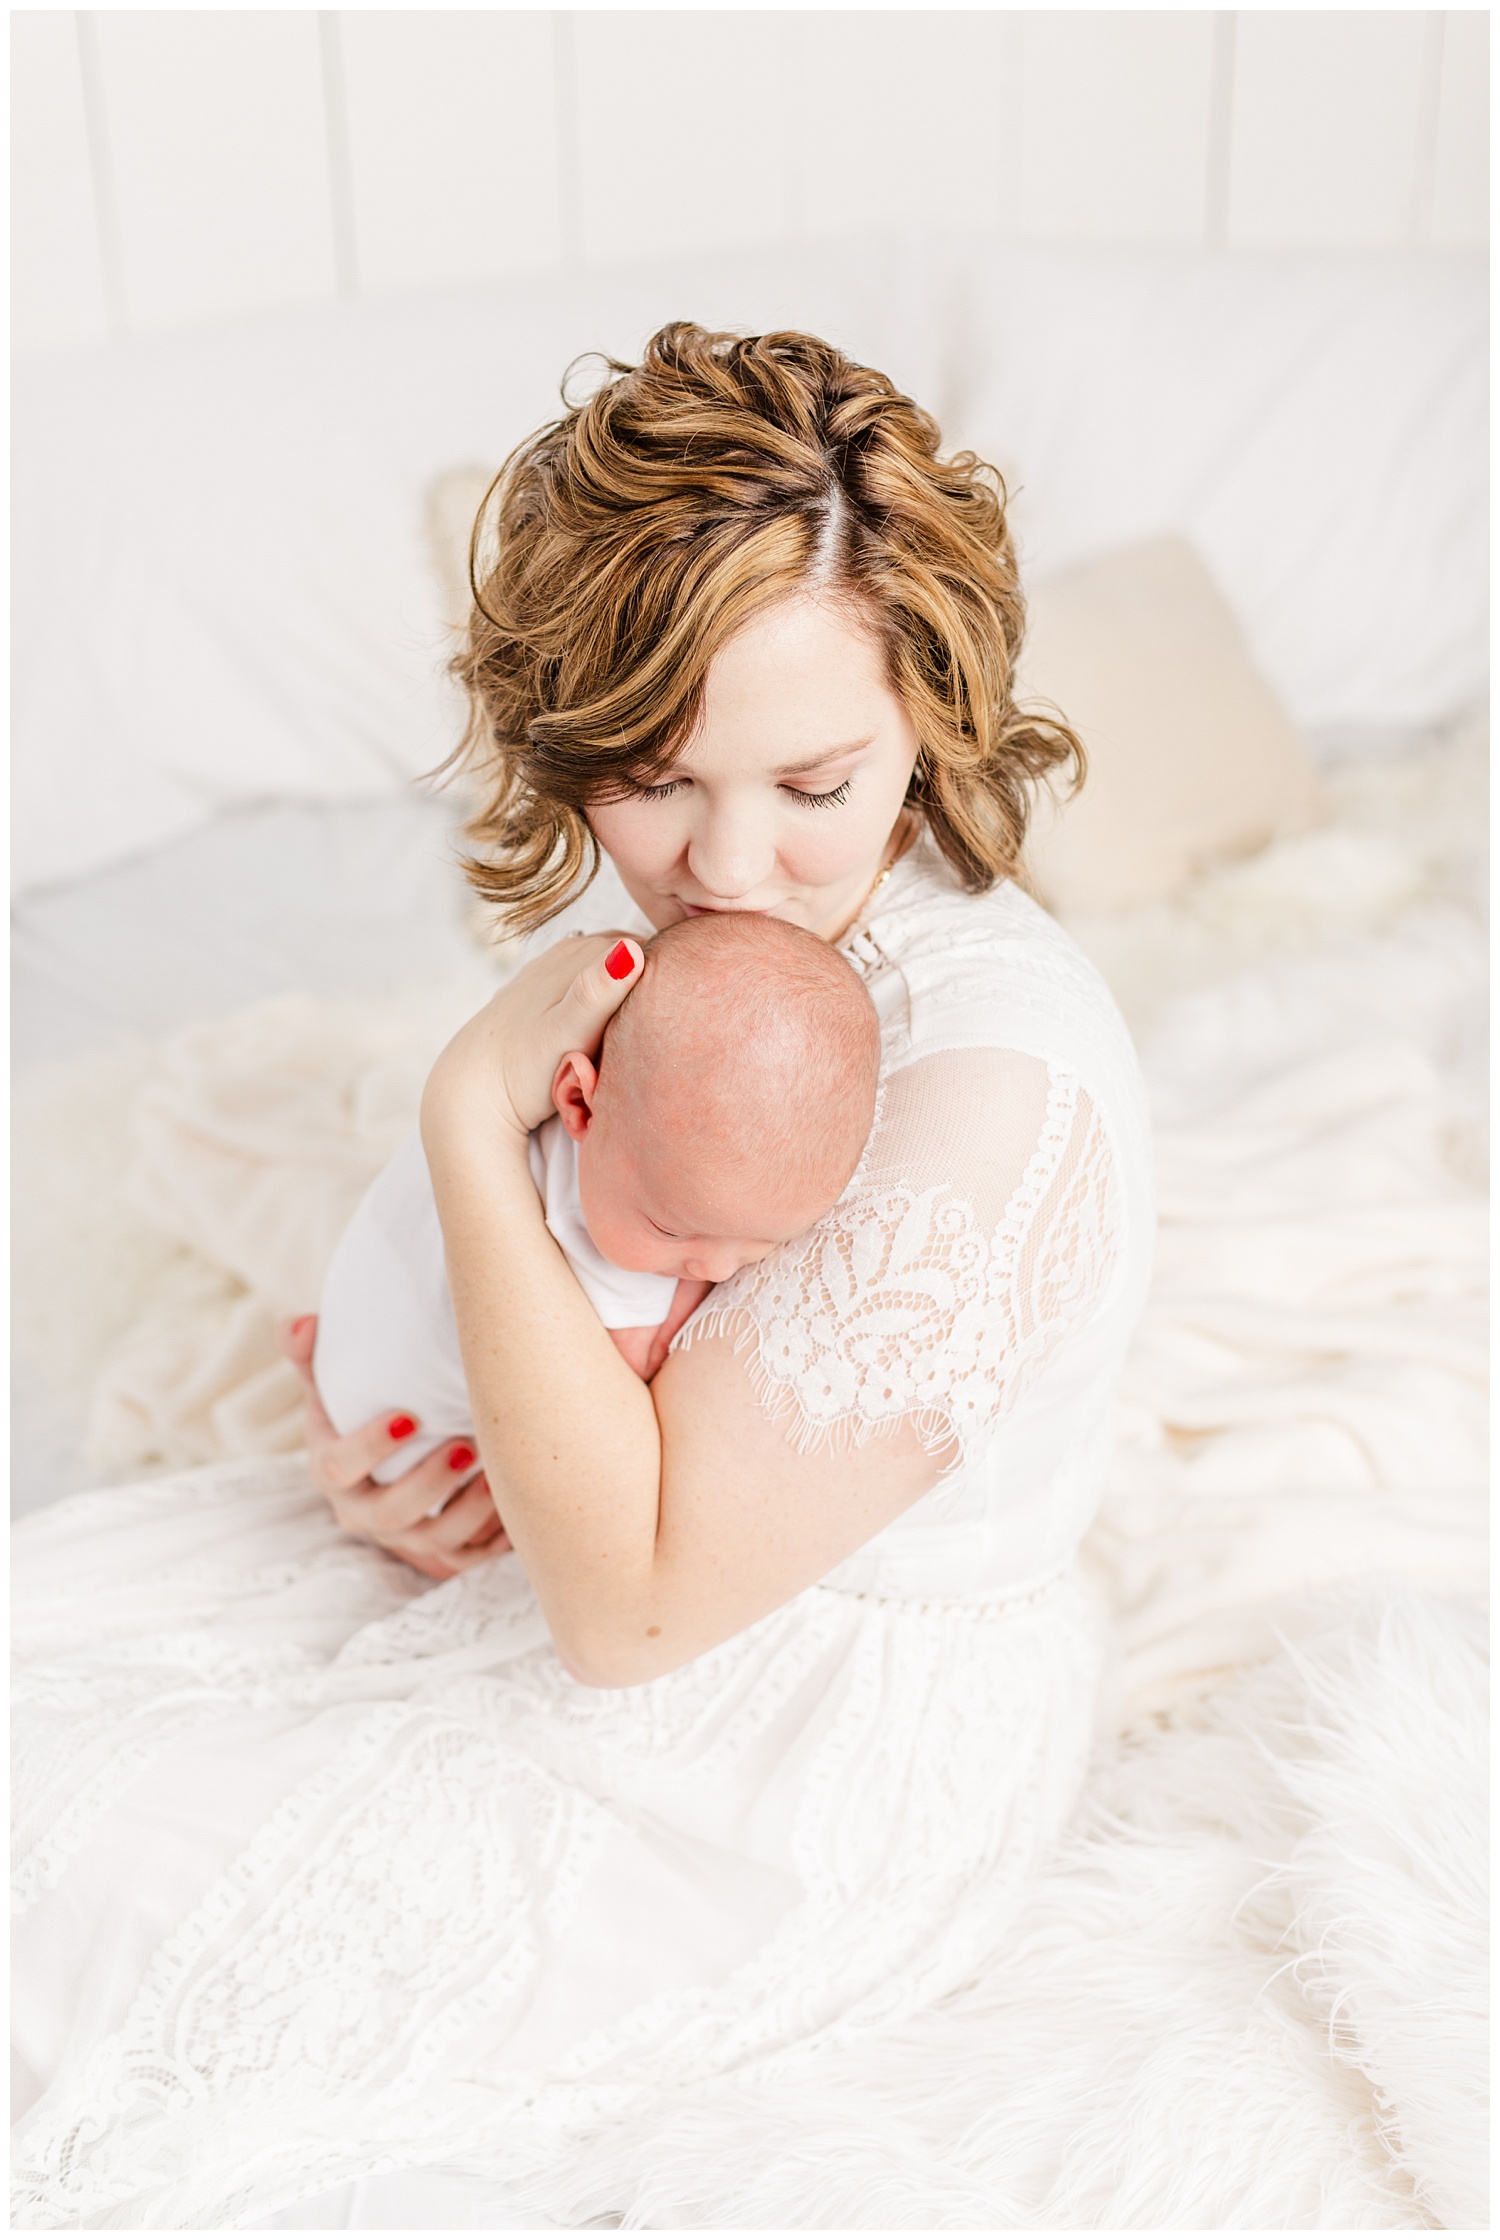 Bree dressed in white lace sits on her bed and gently kisses her new baby boy | CB Studio